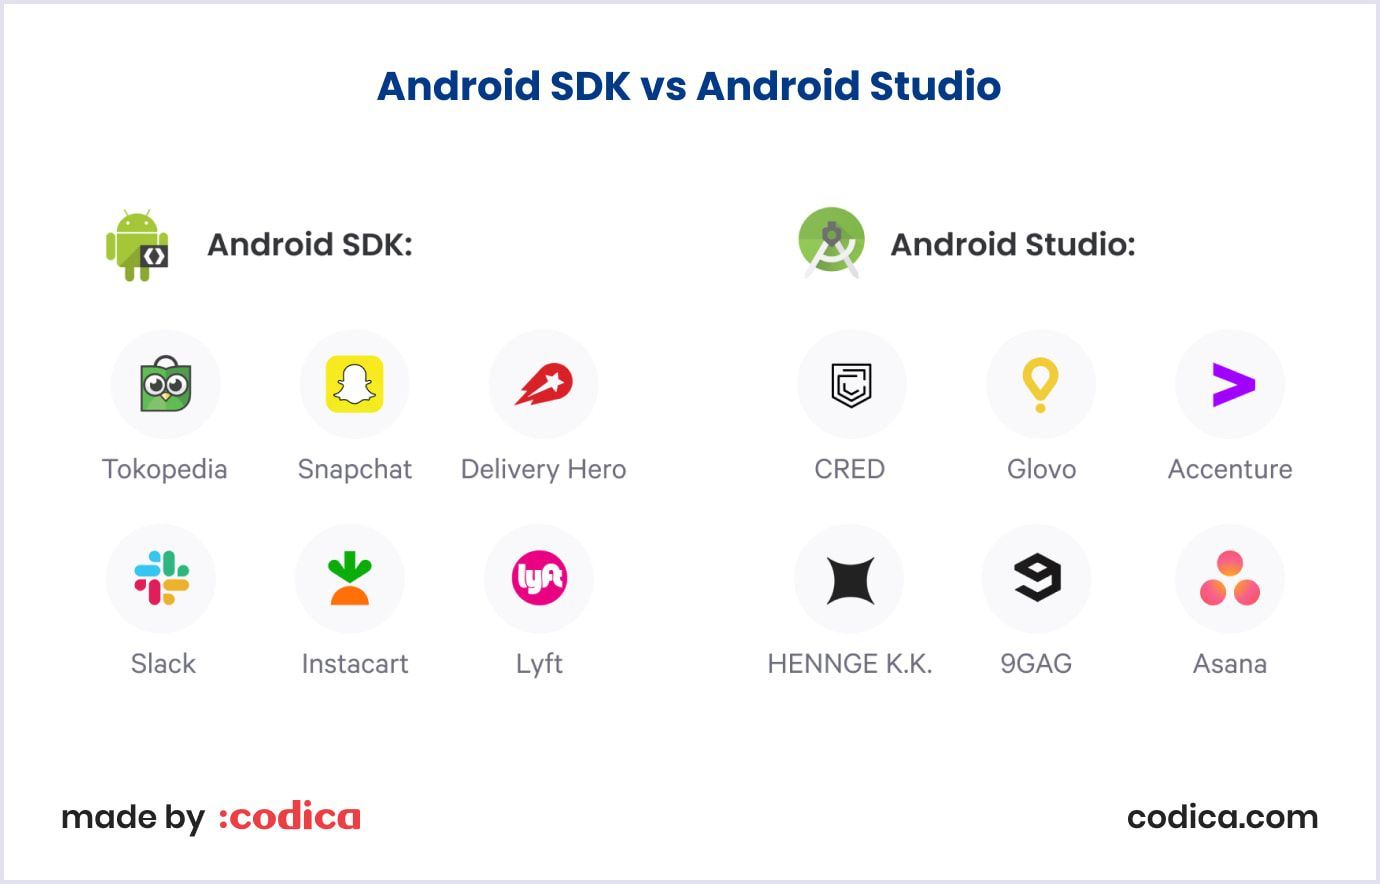 Examples of companies that used Android Studio and Android Software Development Kit